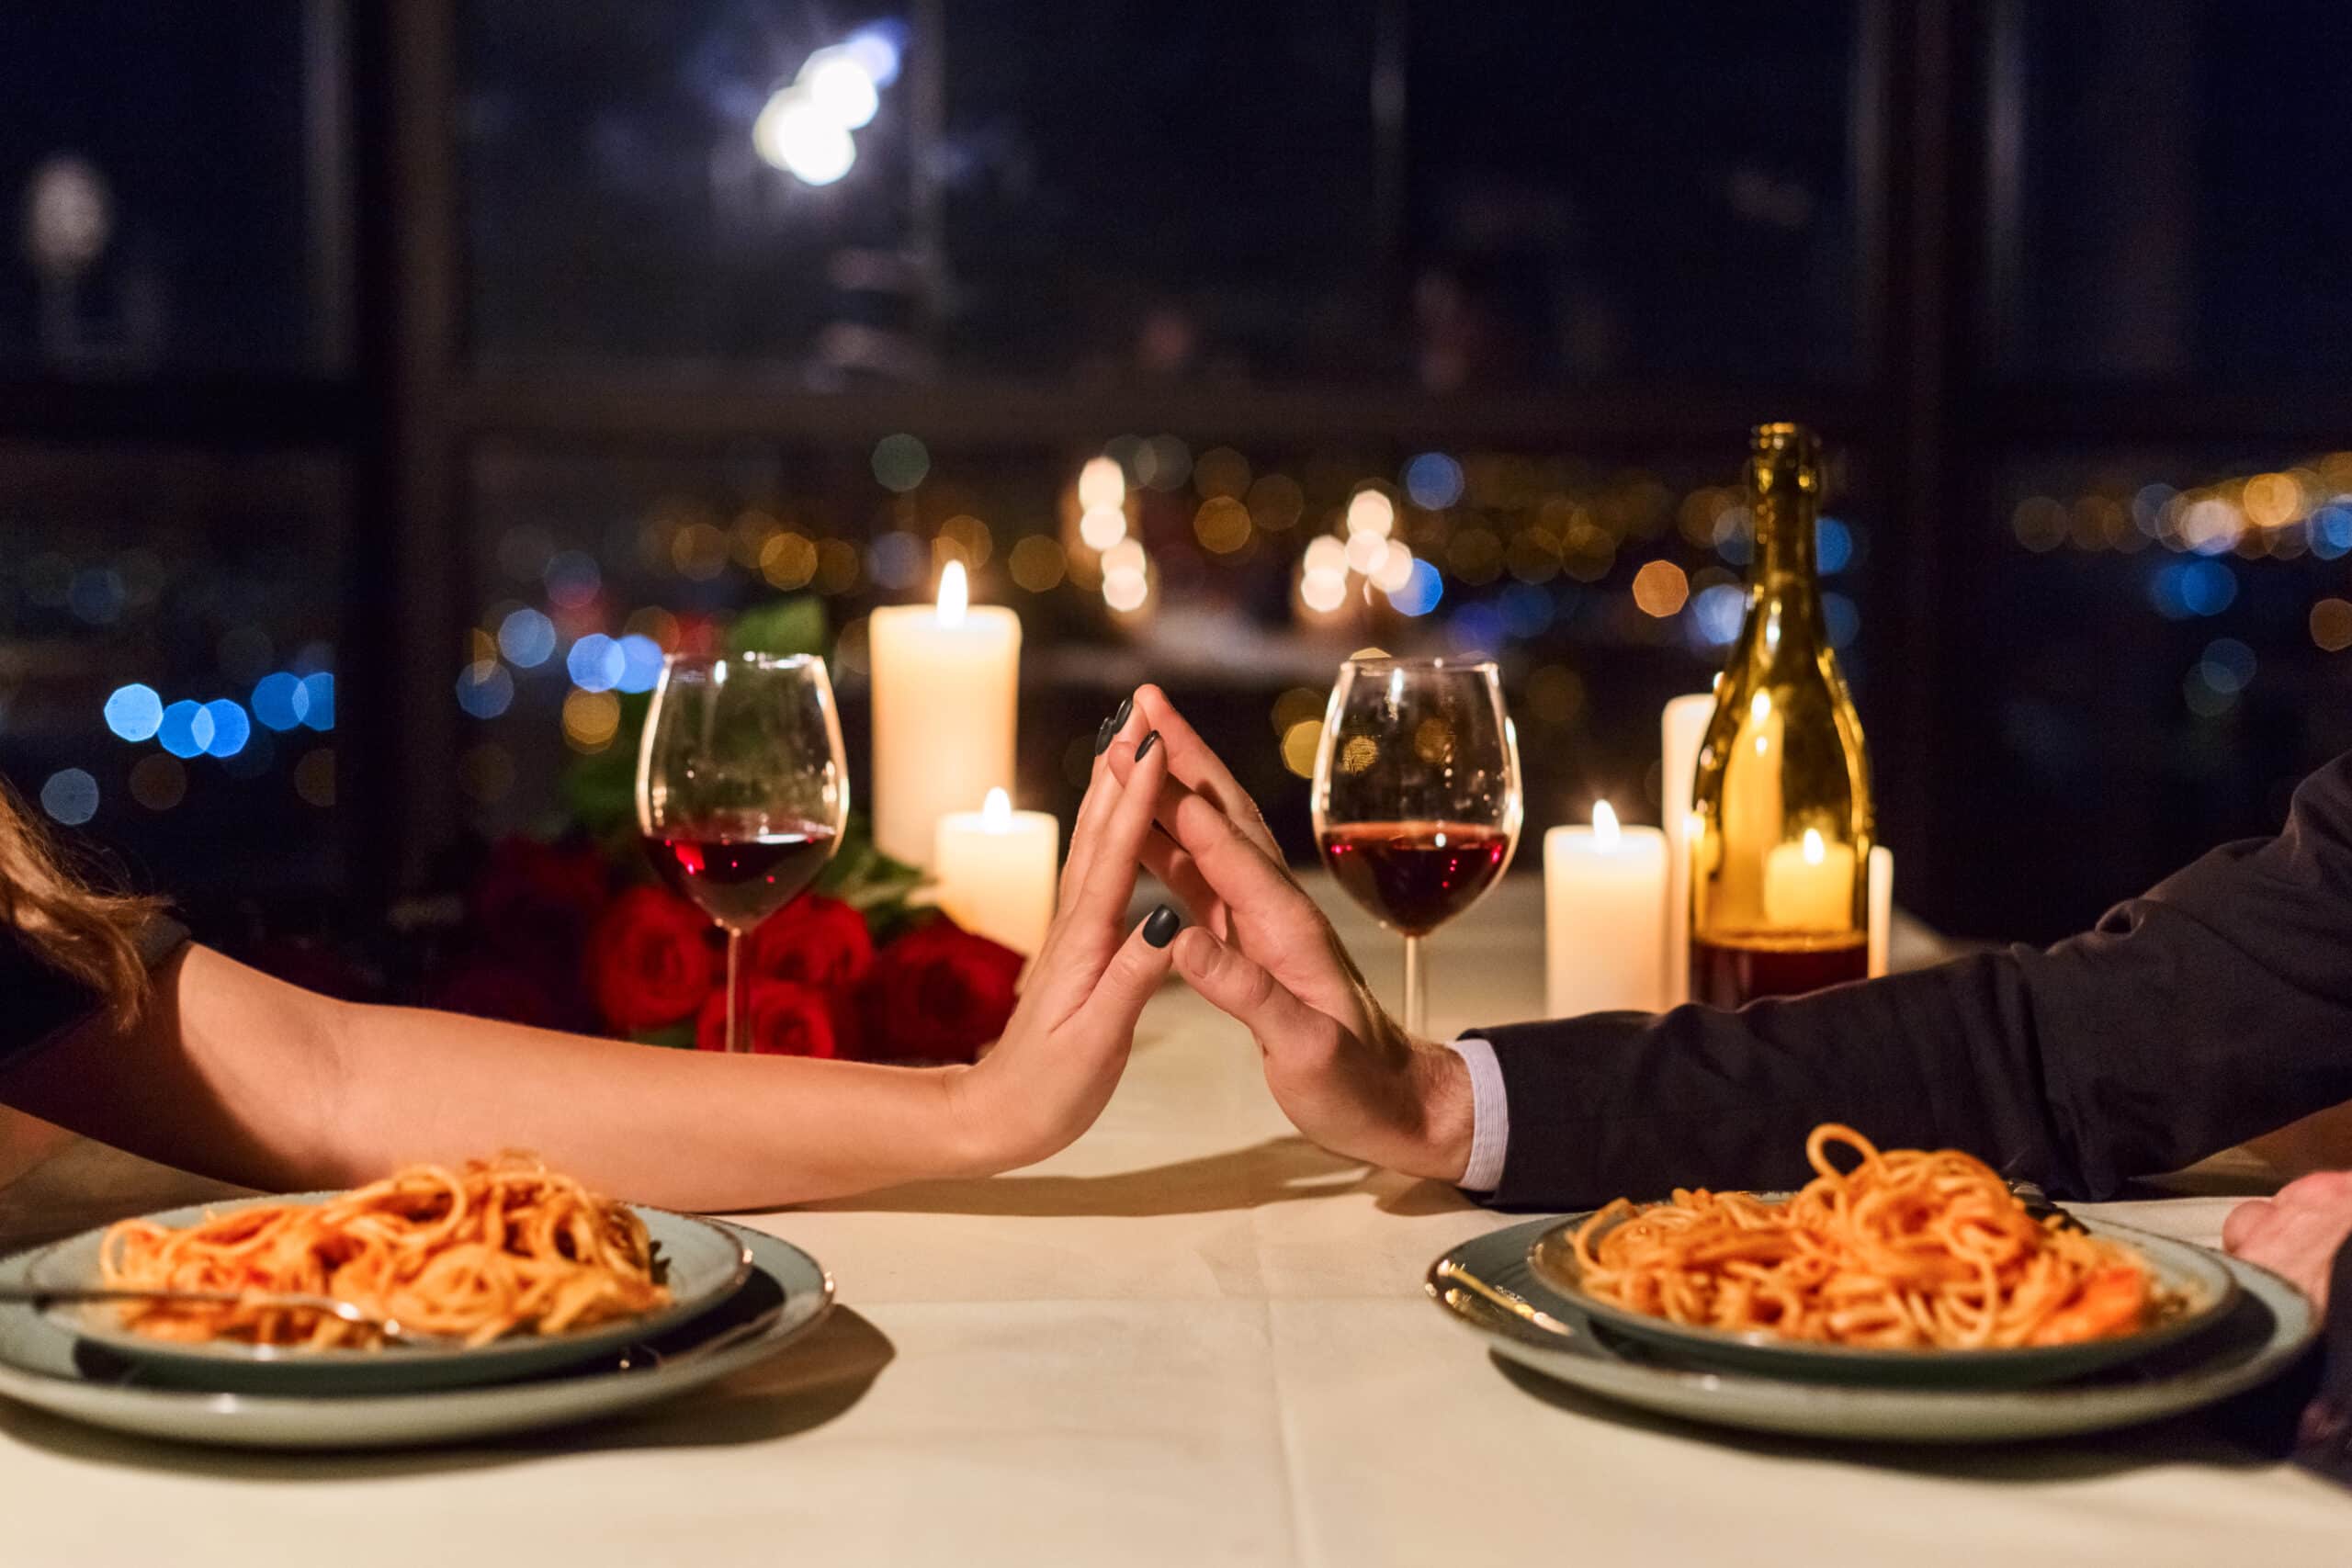 Couple having dinner at a restaurant and touching hands